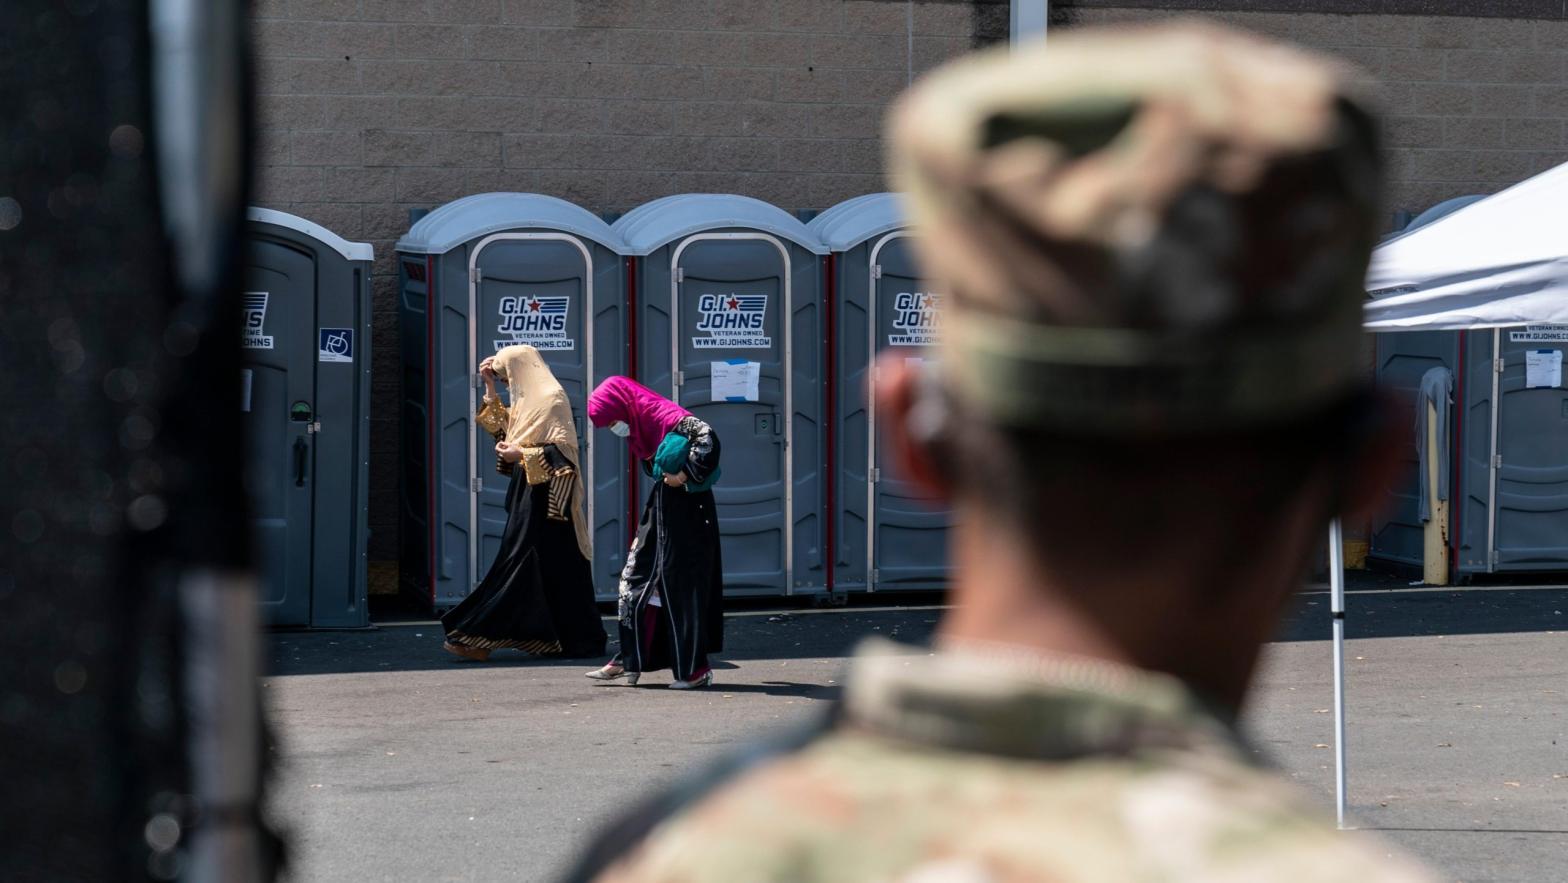 A U.S. soldier watches civilians at a processing centre for Afghan refugees at Dulles Expo Centre in Chantilly, Virginia on Aug. 24, 2021. (Photo: Joshua Roberts, Getty Images)